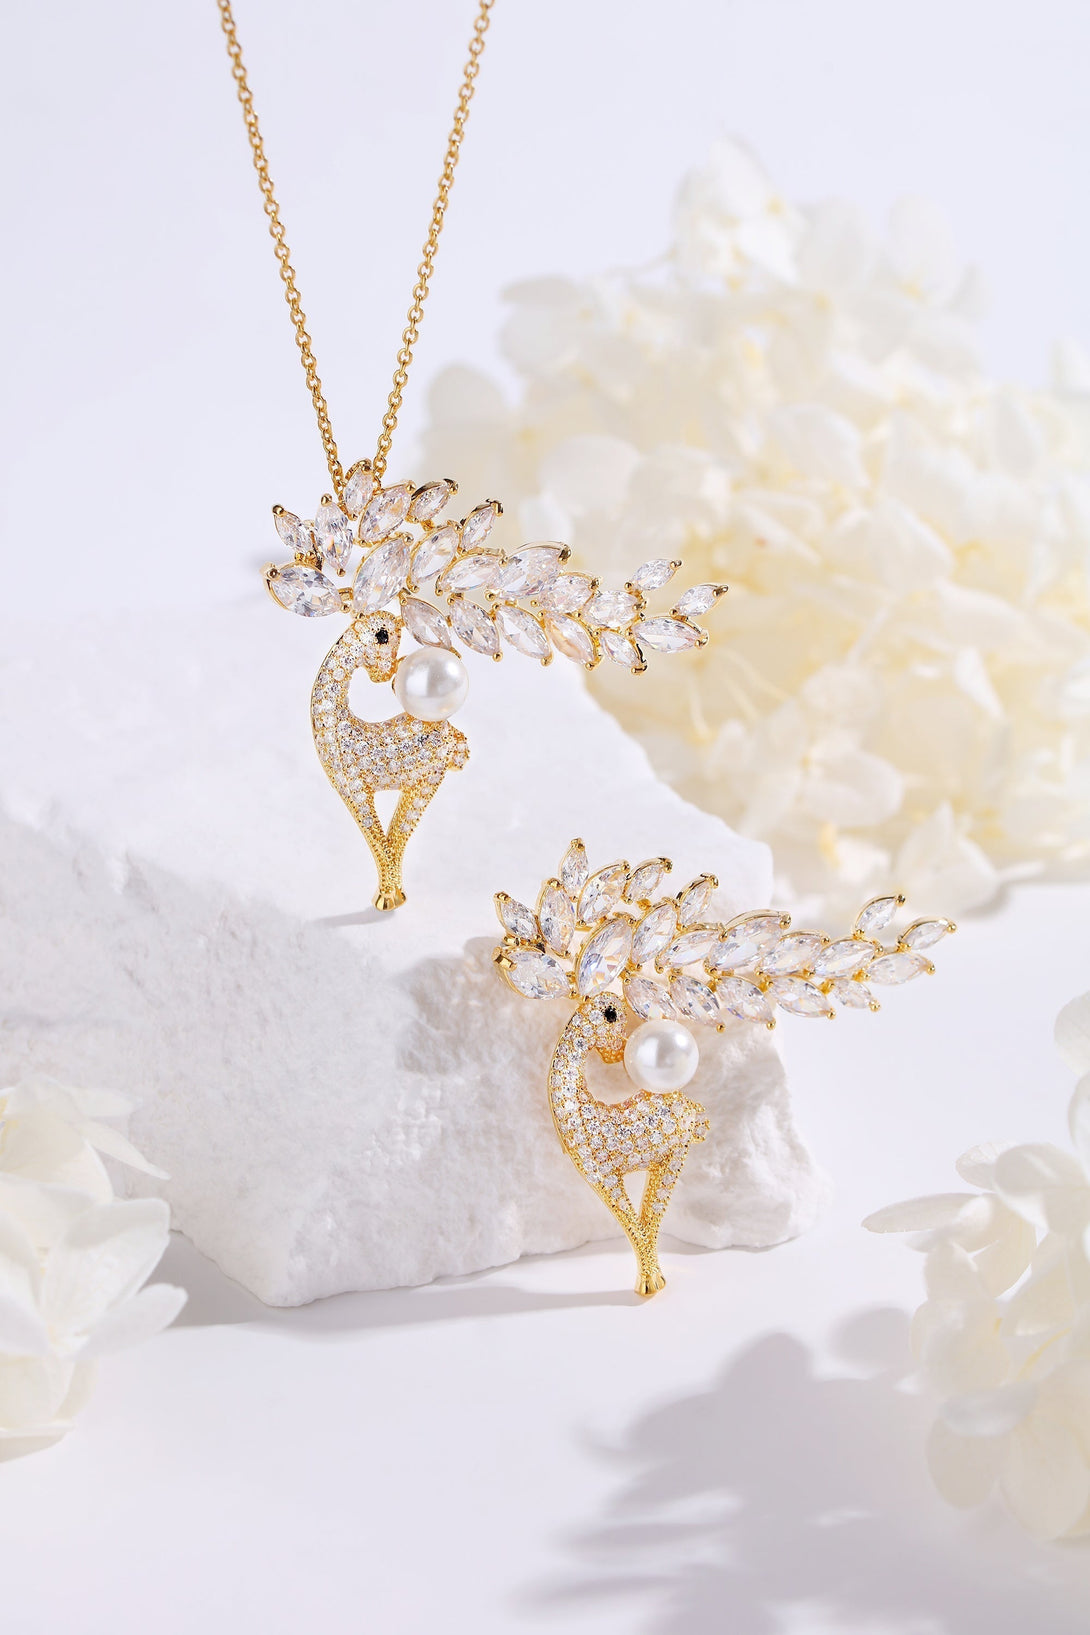 Gold Pavé and Pearl Reindeer Brooch Necklace Set - Classicharms